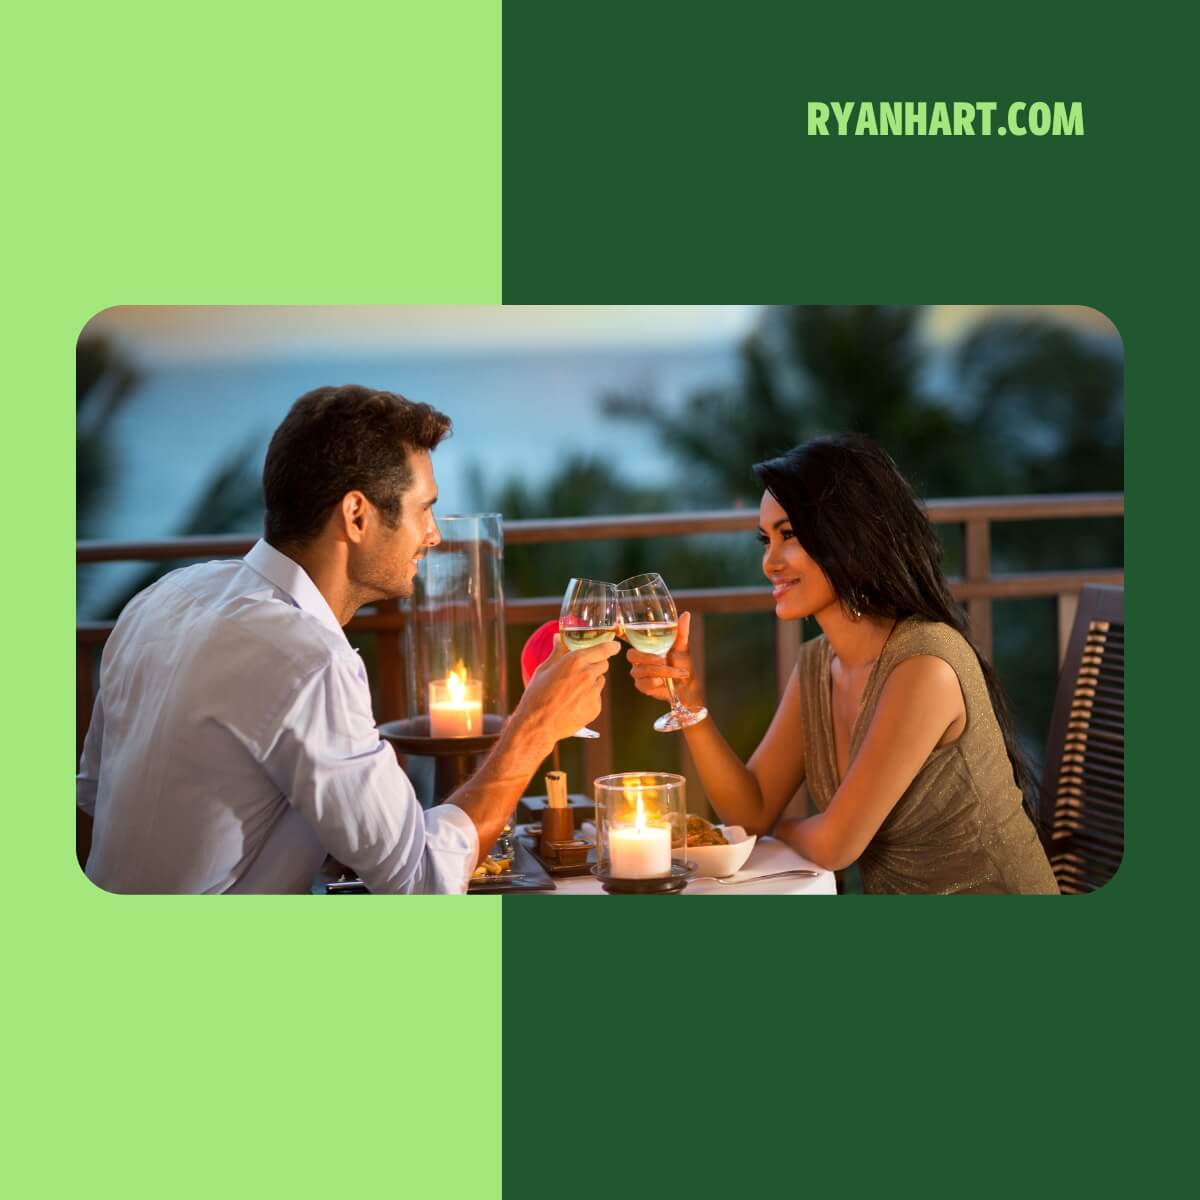 Couple having a candlelit dinner